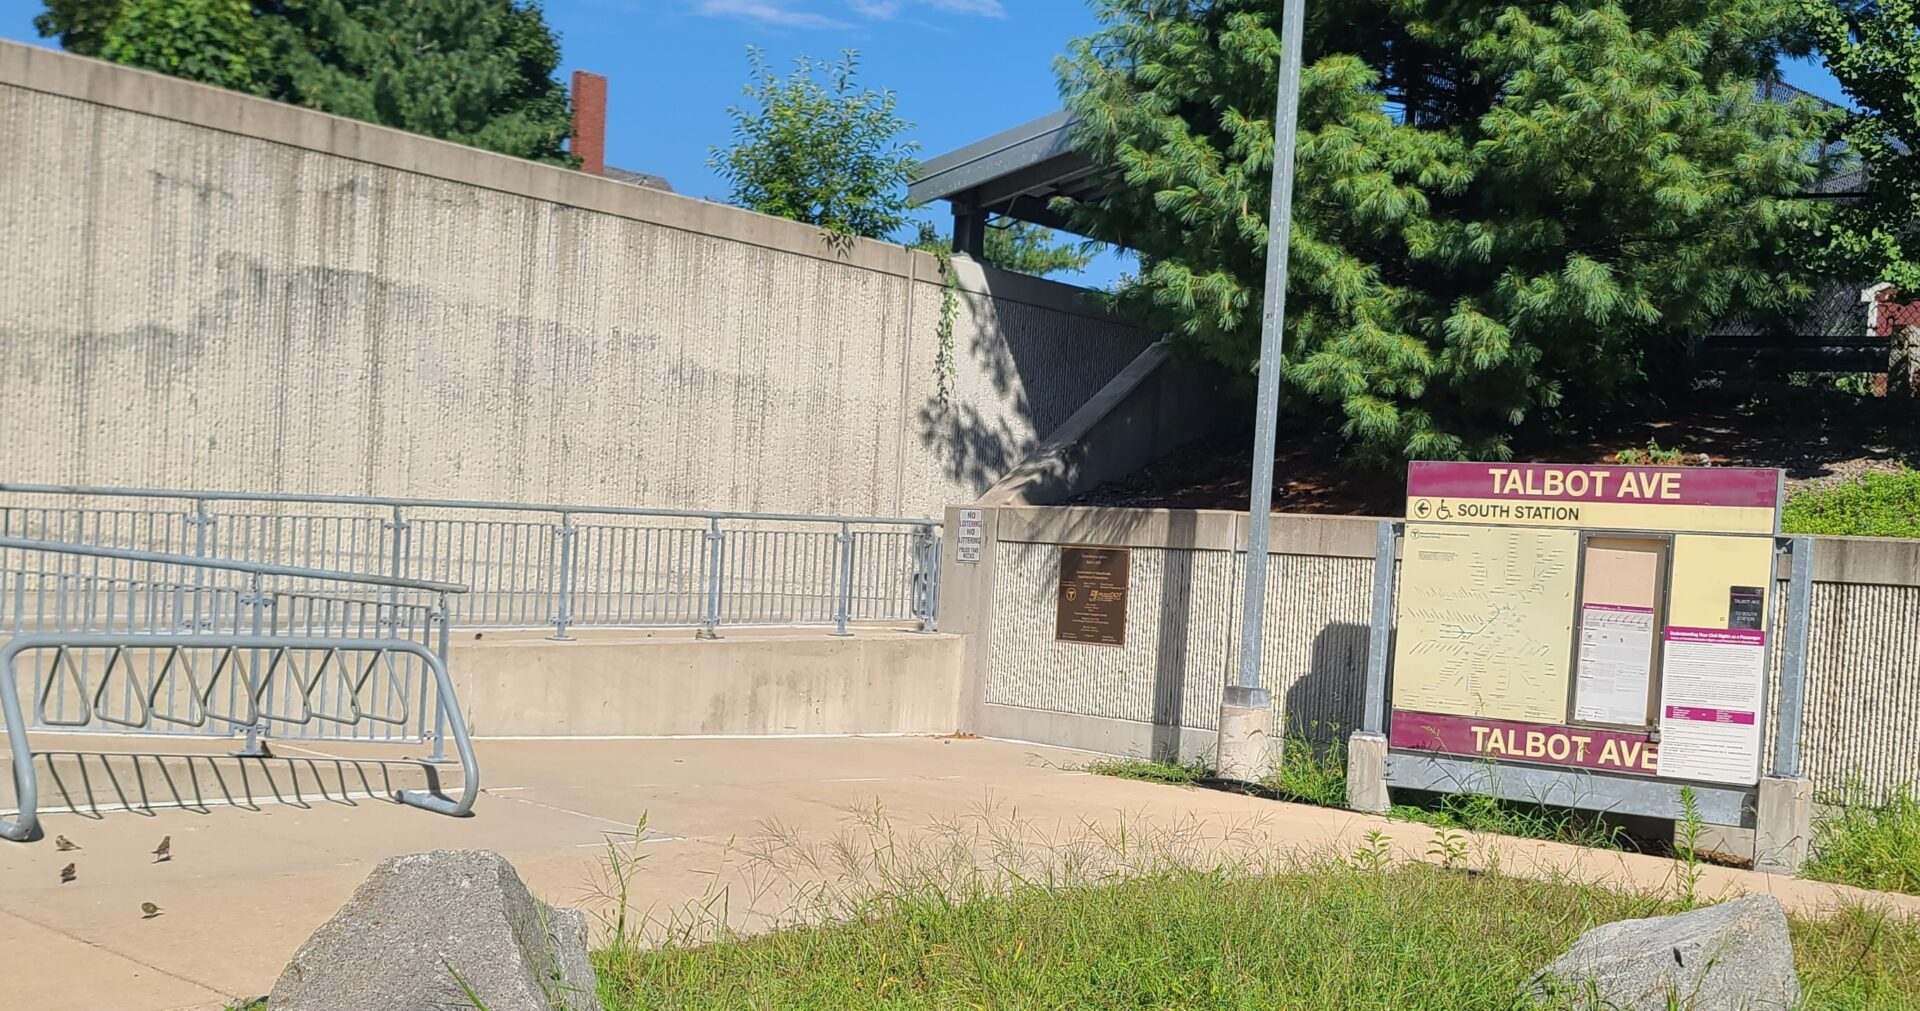 A concrete wall with trees in the background.